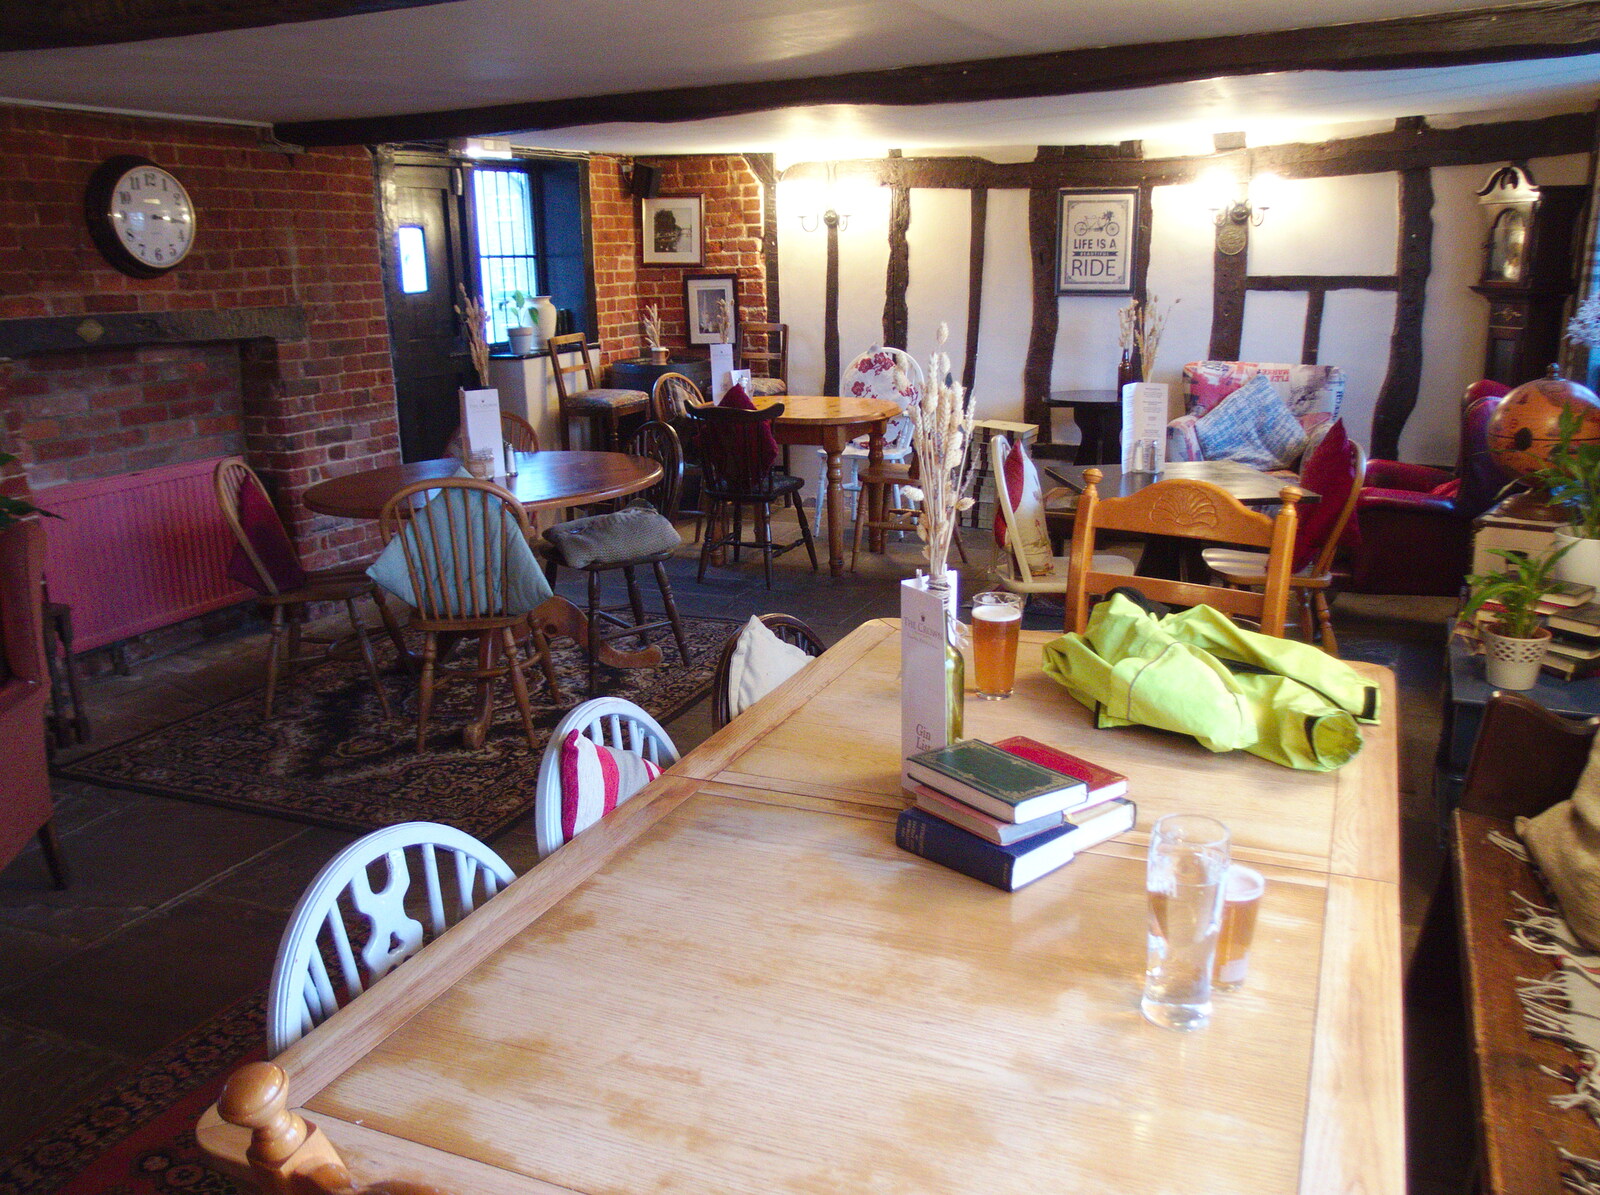 The BSCC at Pulham Market and Hopton, and Lunch in Paddington - 21st May 2019: The lounge at the Pulham Crown is all shabby chic